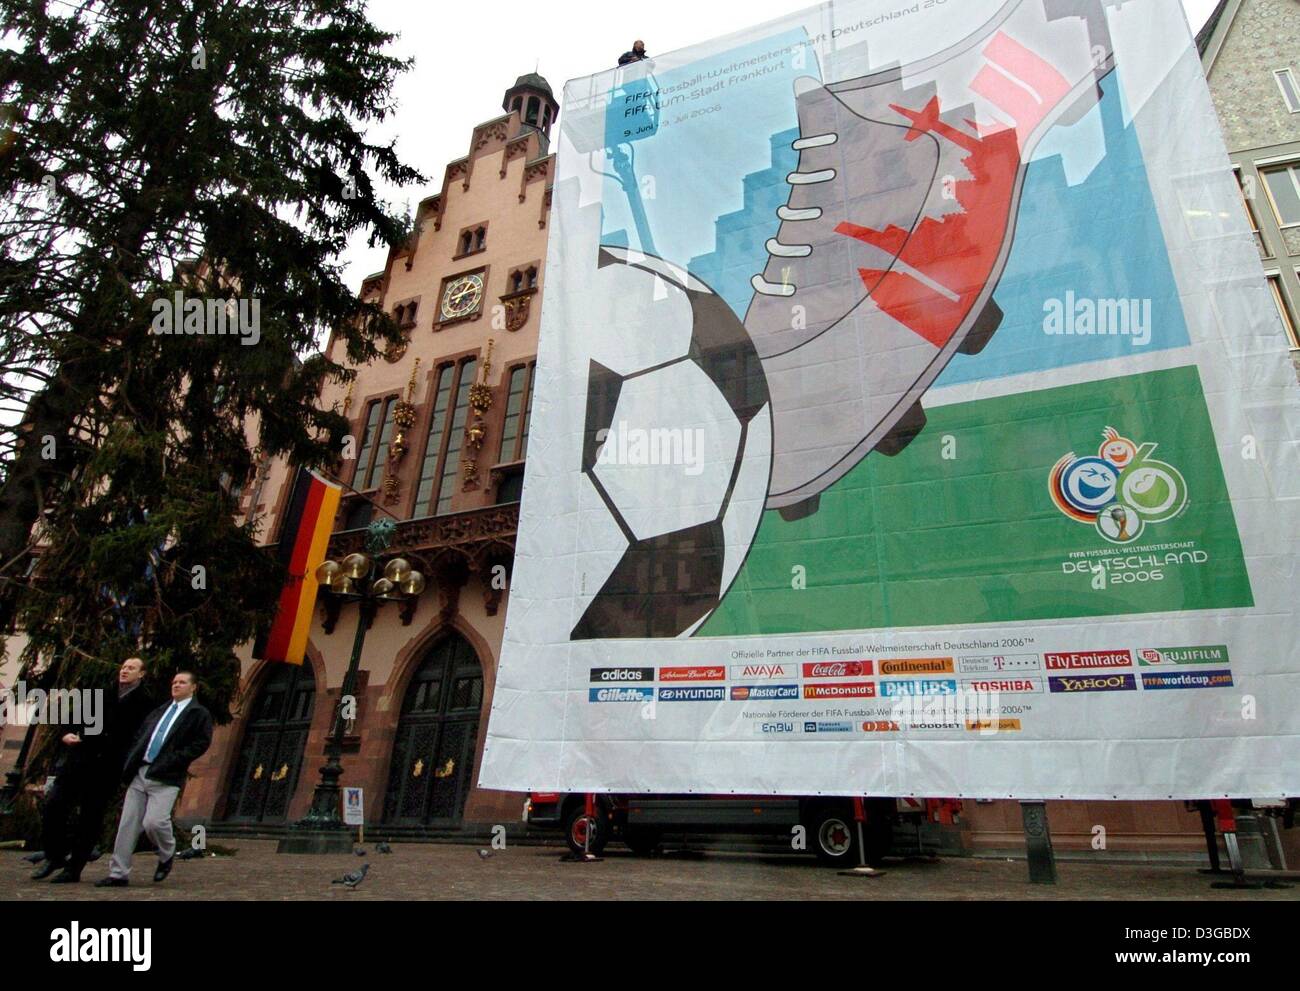 (dpa) - The official FIFA Soccer World Cup 2006 poster for the city of Frankfurt can be seen in front of the city hall in Frankfurt, Germany, 9 November 2004. During the World Cup in 2006 the giant poster will be on display in changing spots of the city. Stock Photo